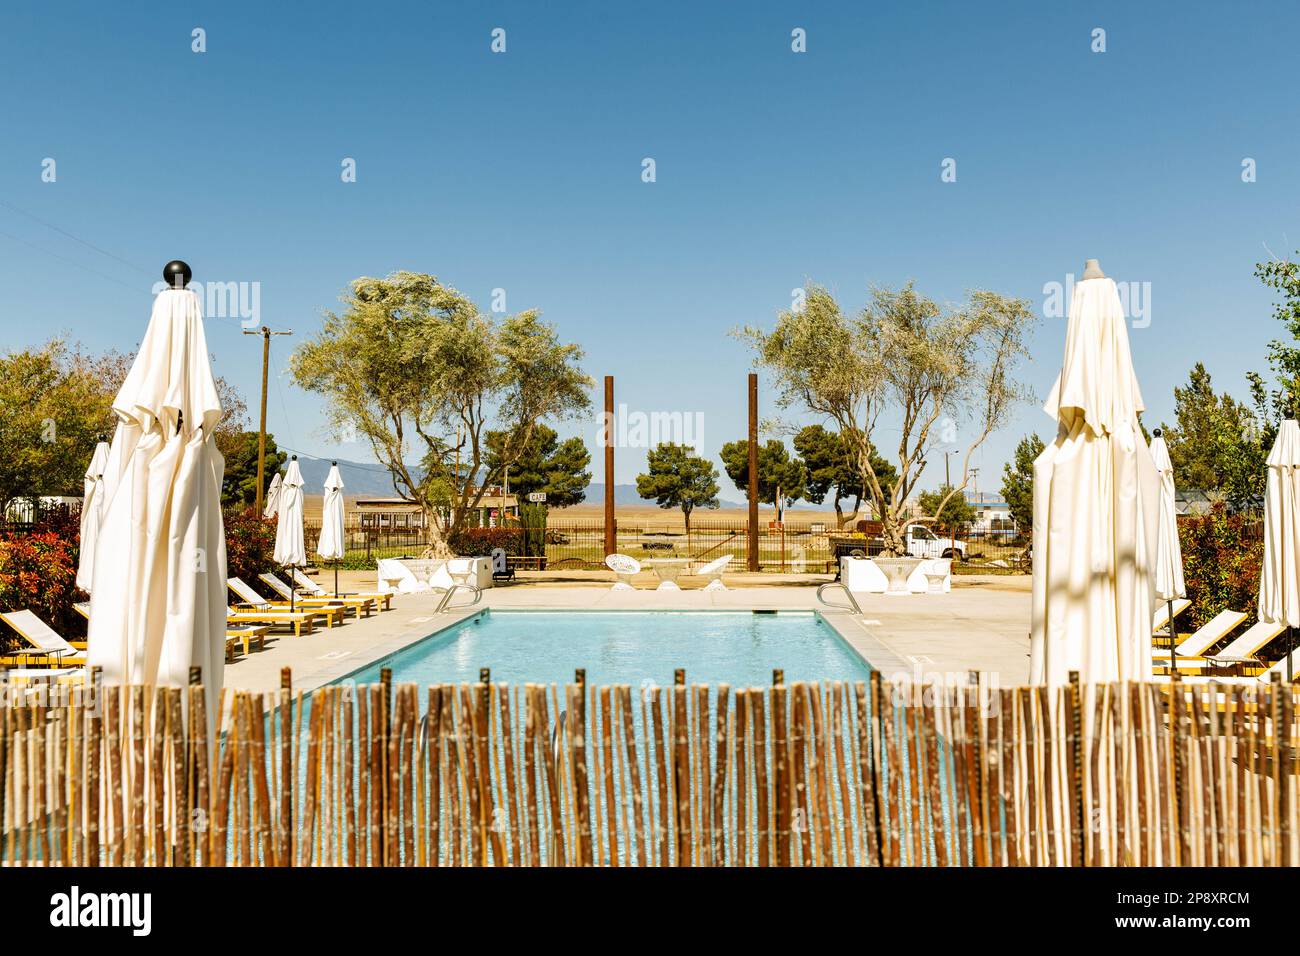 An empty hotel pool during midday sun from behind the bamboo fence Stock Photo